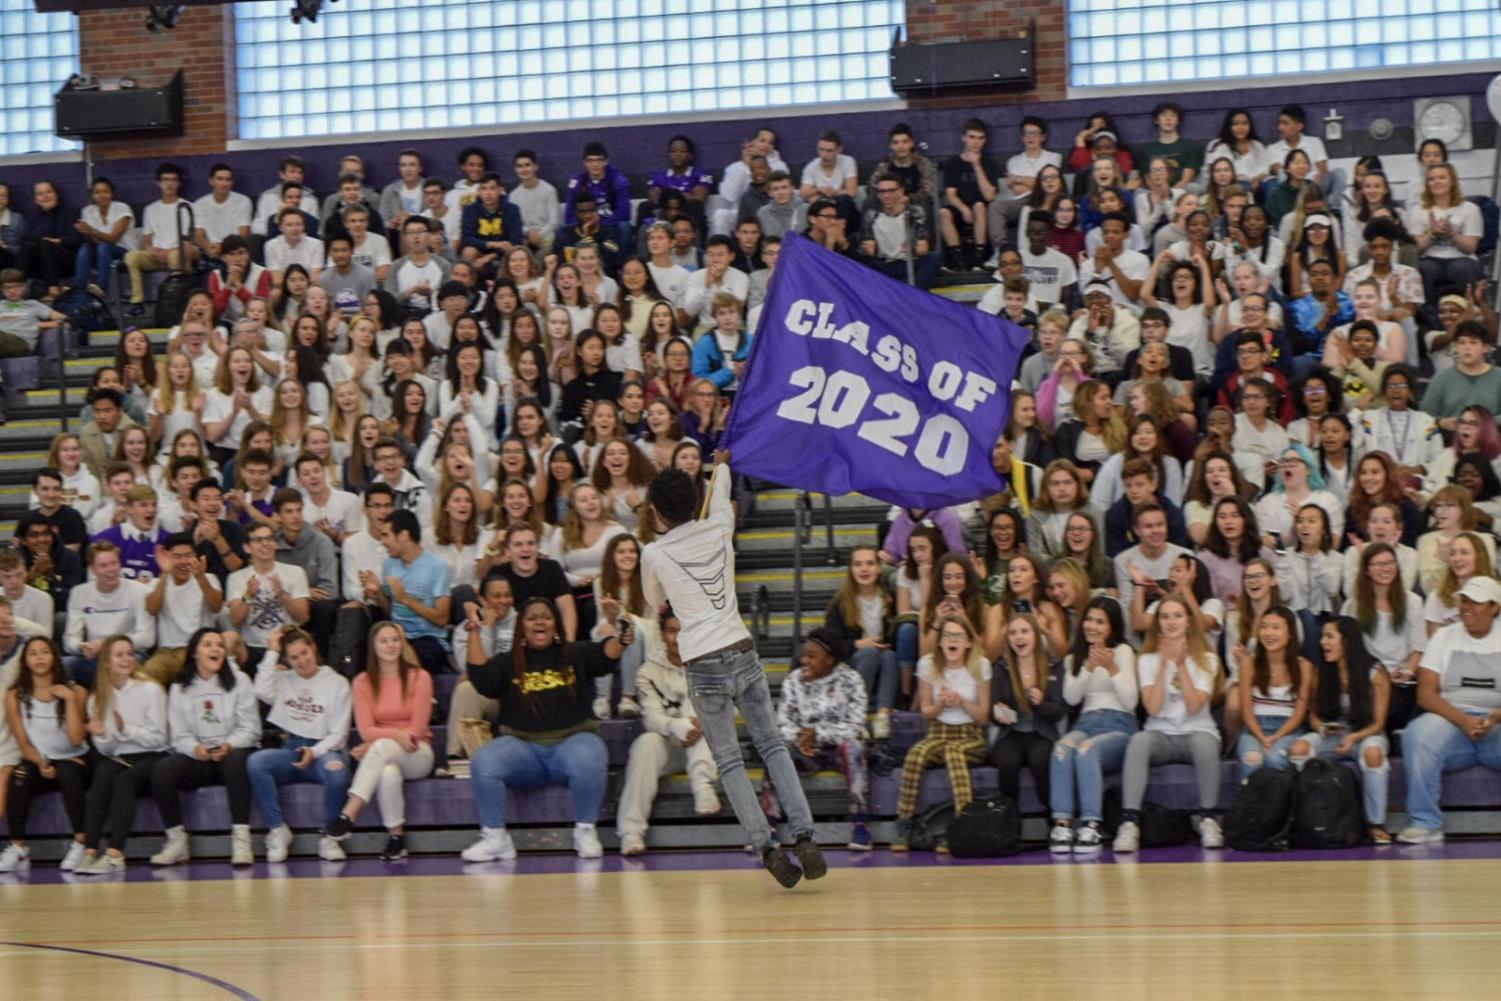 Pioneer+Homecoming+Pep+Assembly+Slideshow